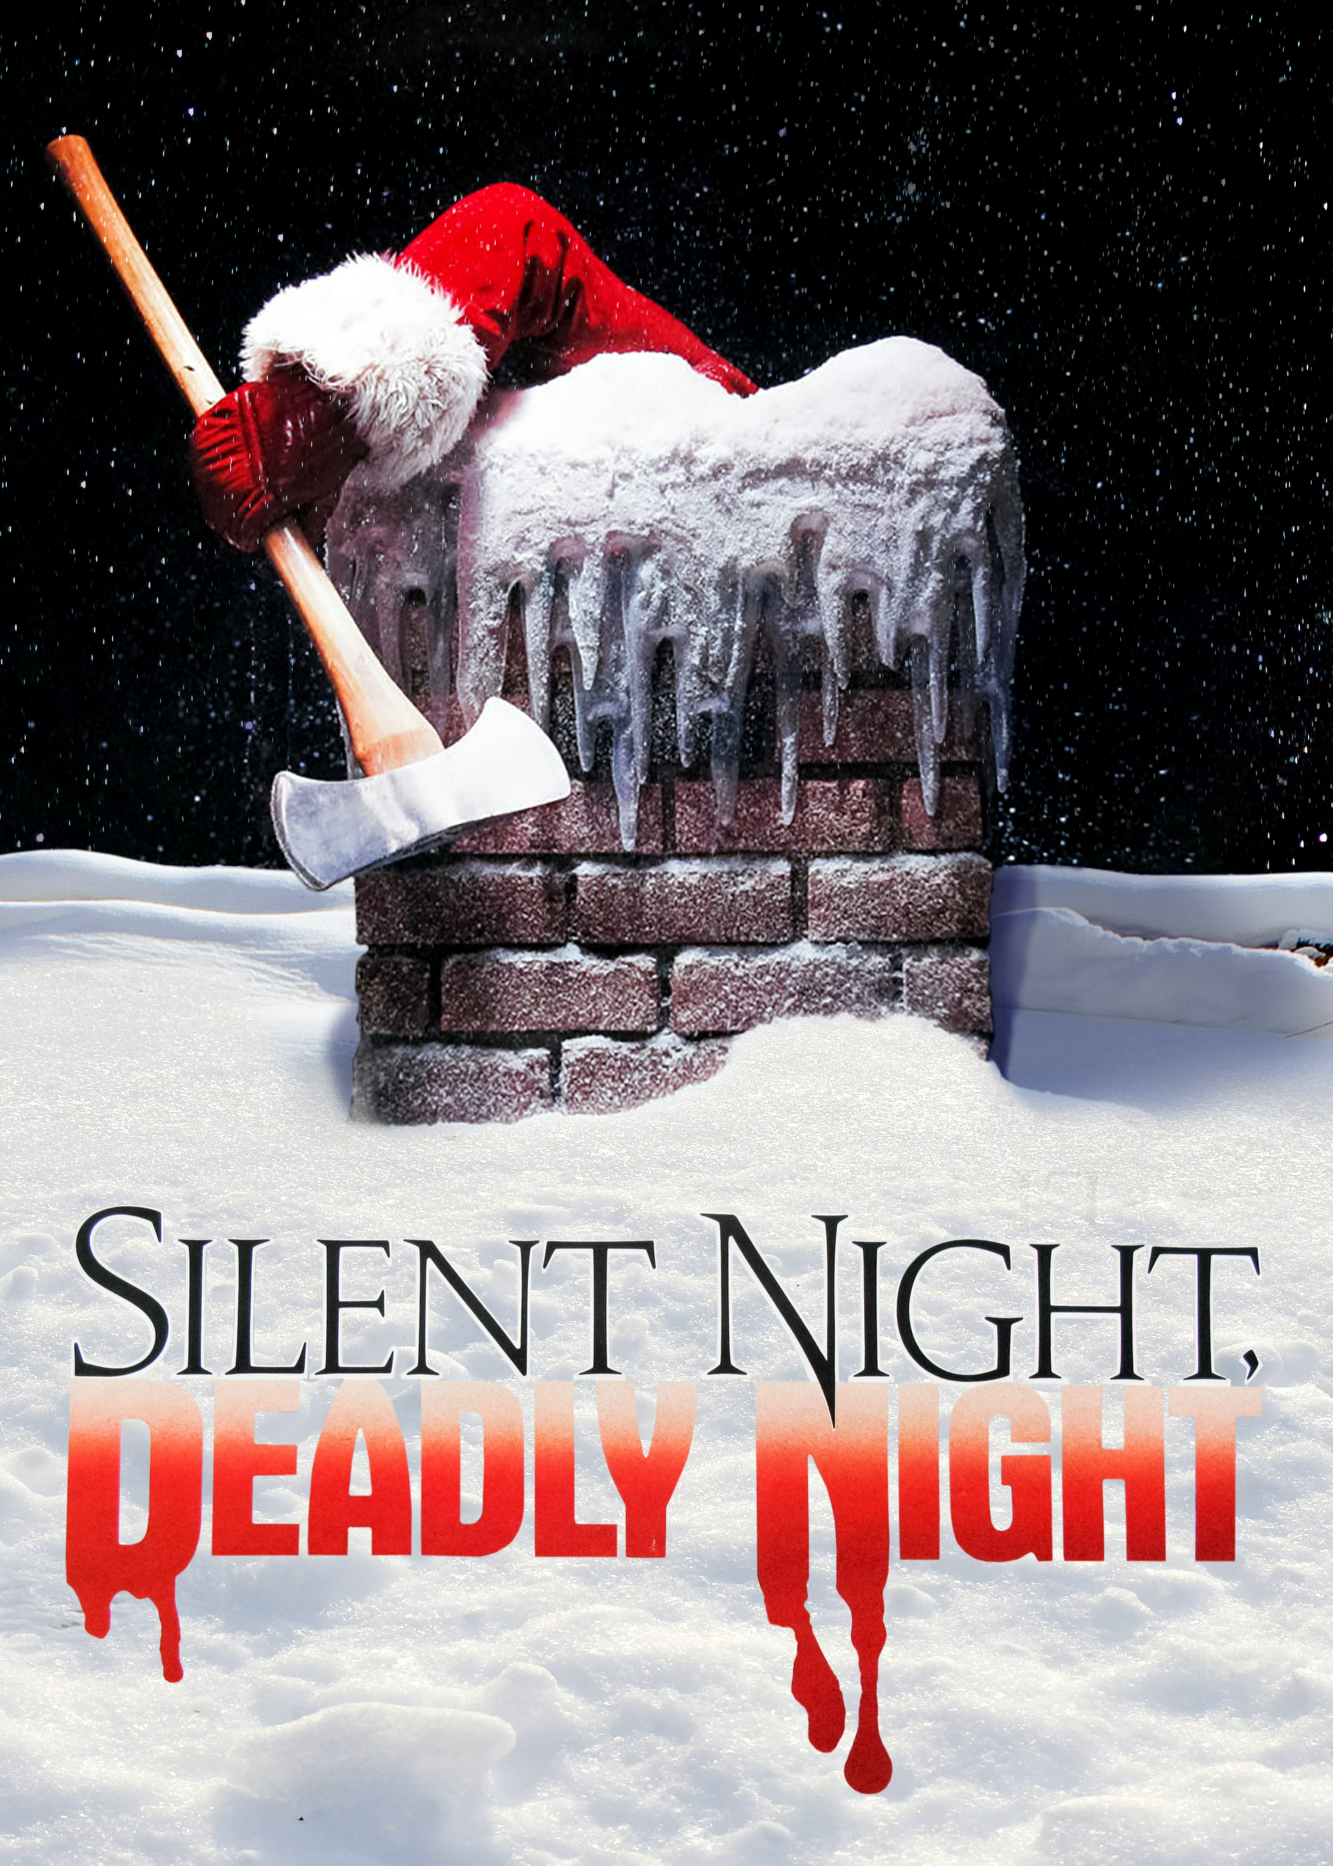 Poster Phim Silent Night, Deadly Night (Silent Night, Deadly Night)